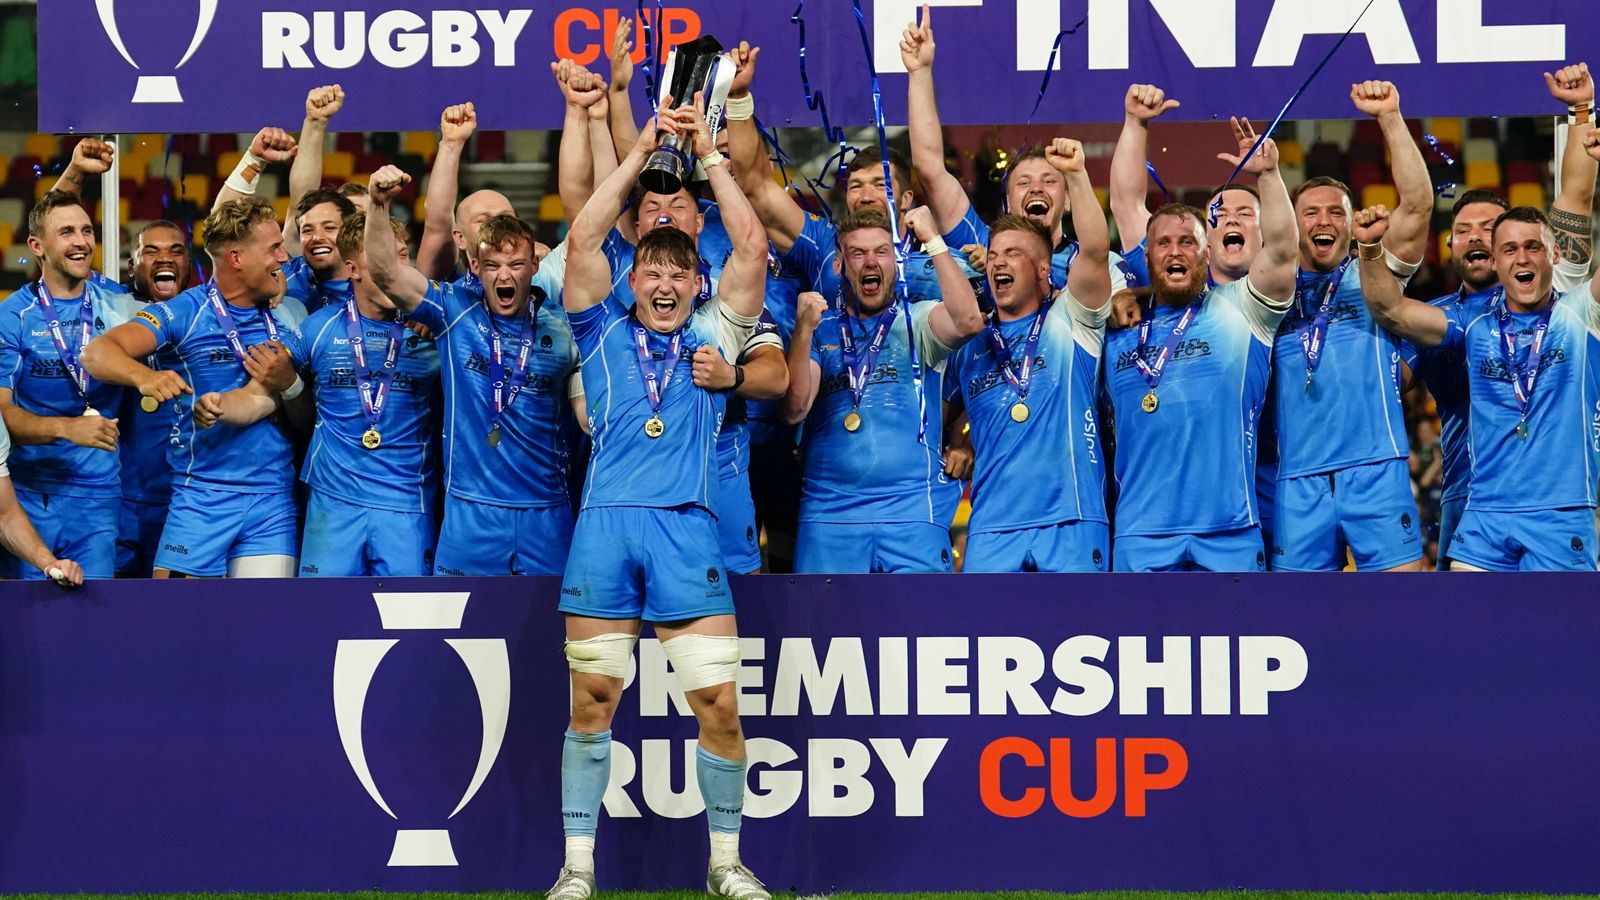 Premiership Rugby Cup Final Worcester win after dramatic extra time